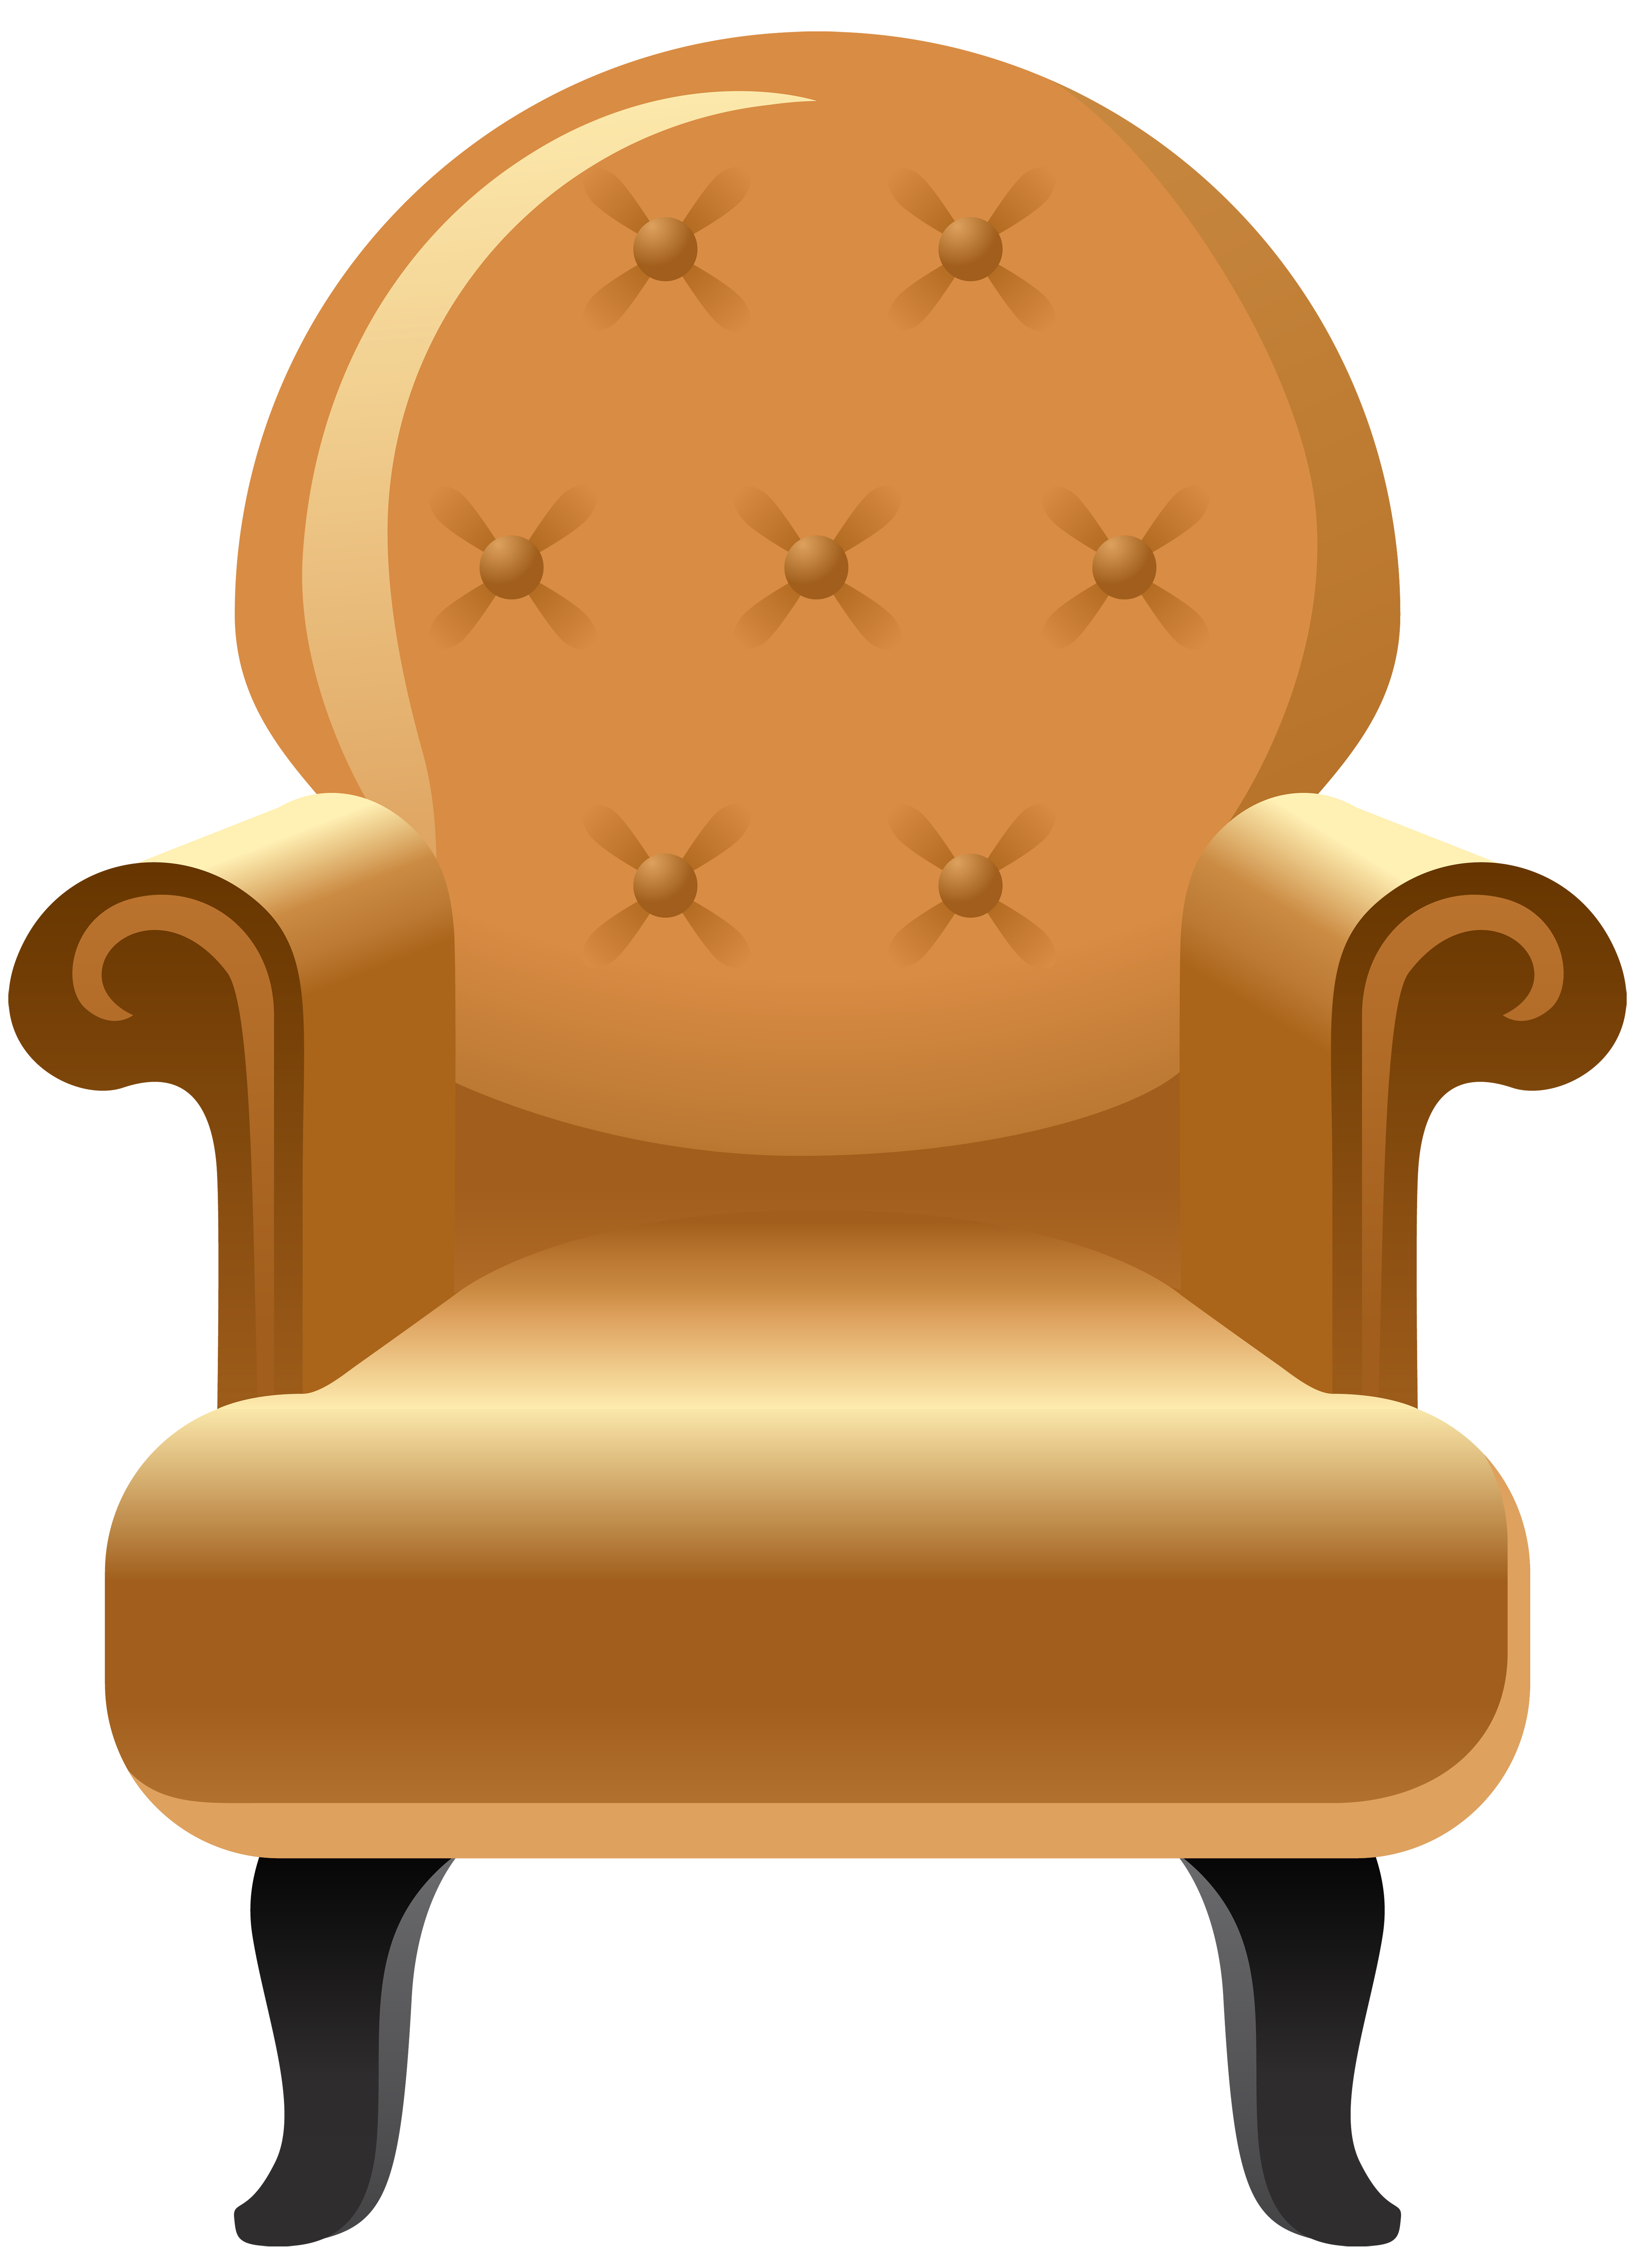 clipart chair double